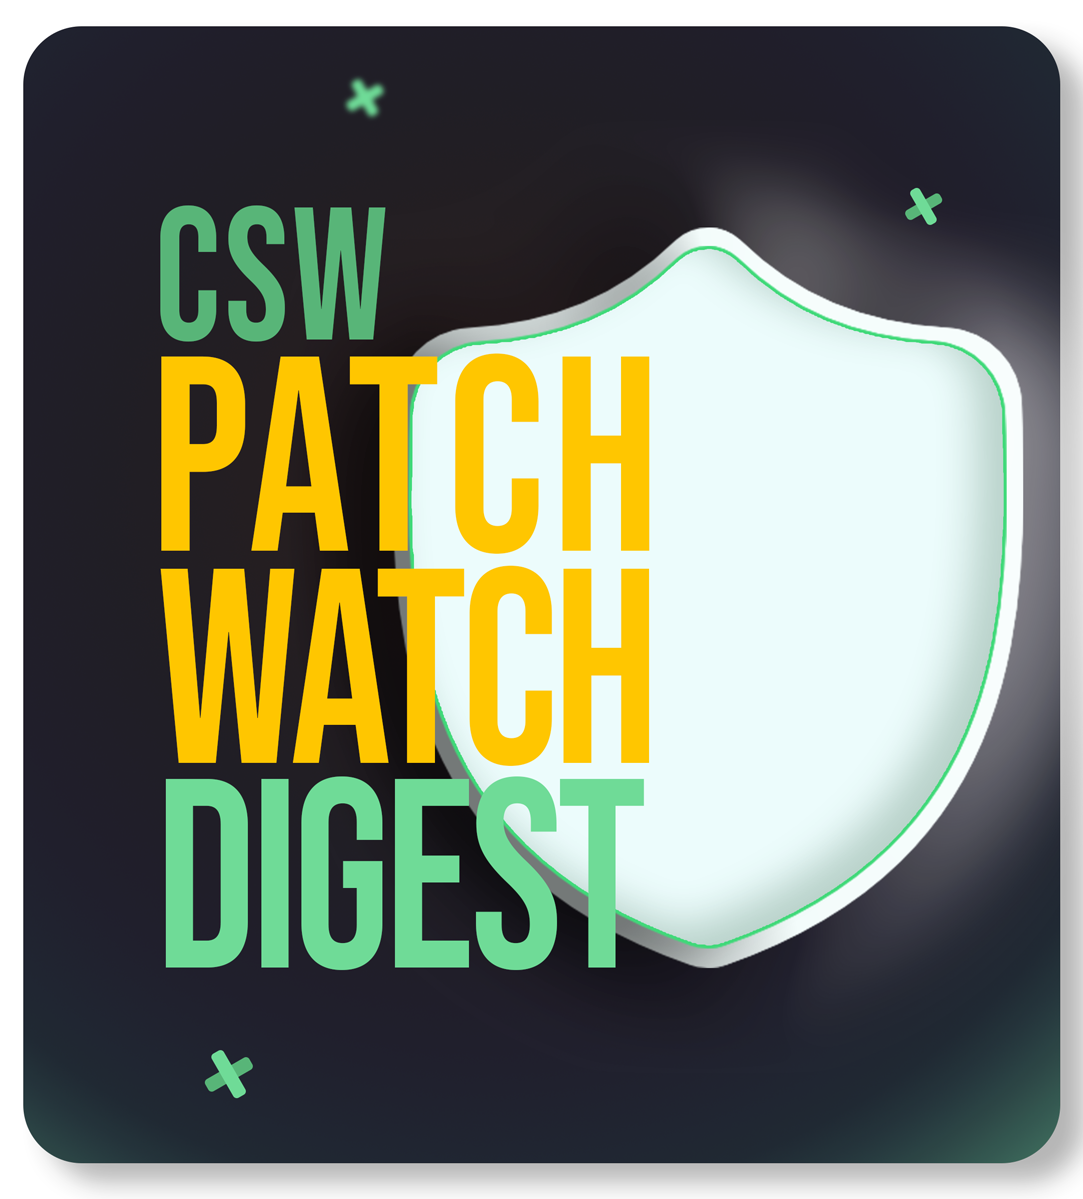 PatchWatch-Thumbnail